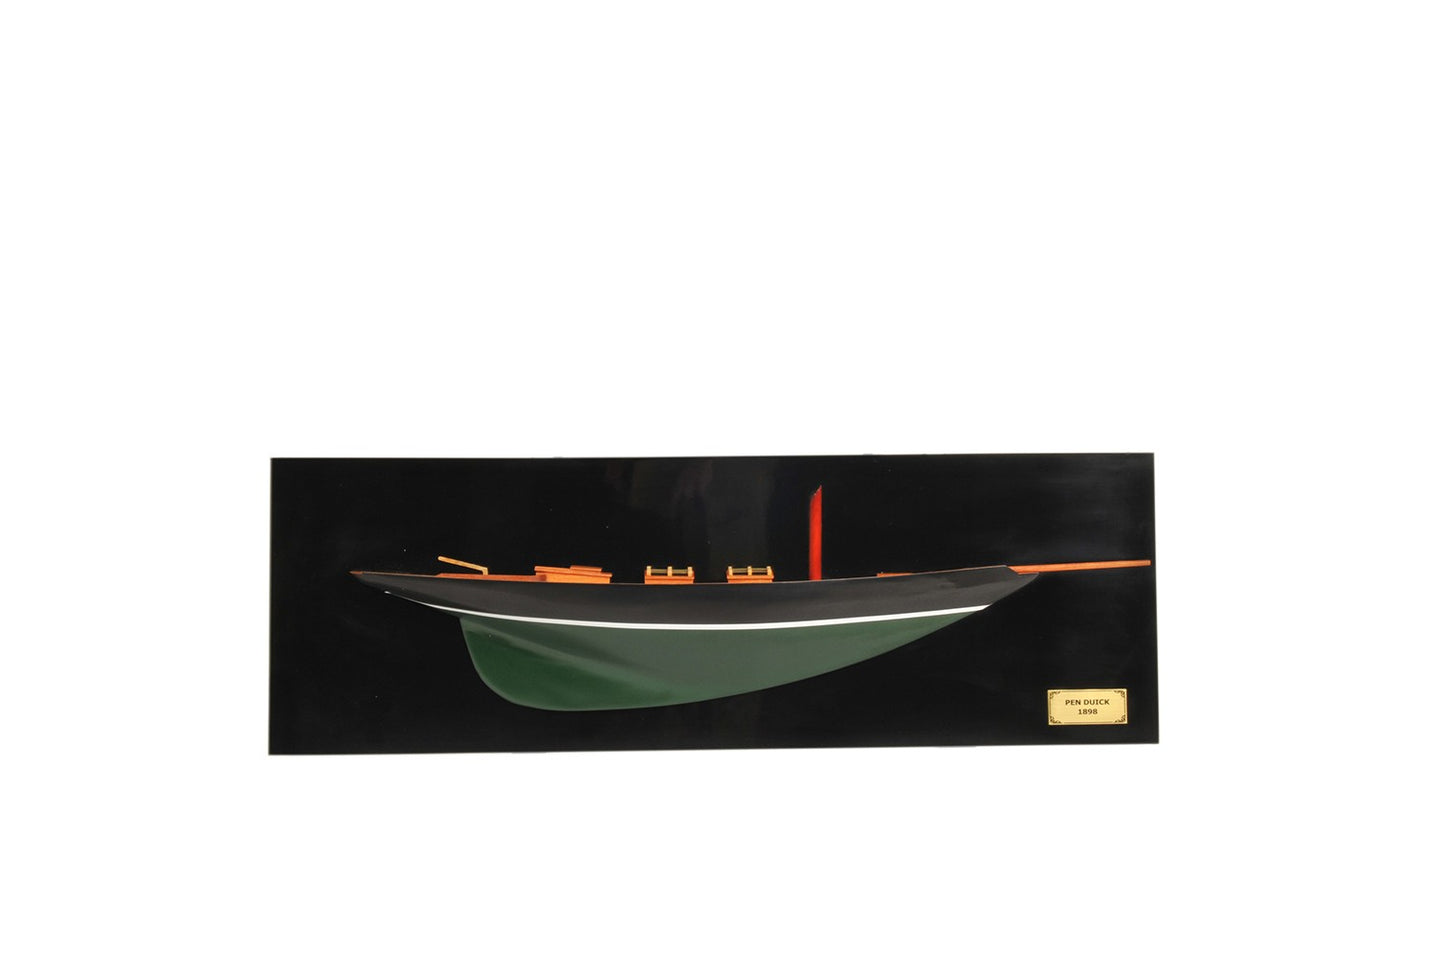 12" Black and Green c1898 Pen Duick Half-Hull Hand Painted Decorative Boat